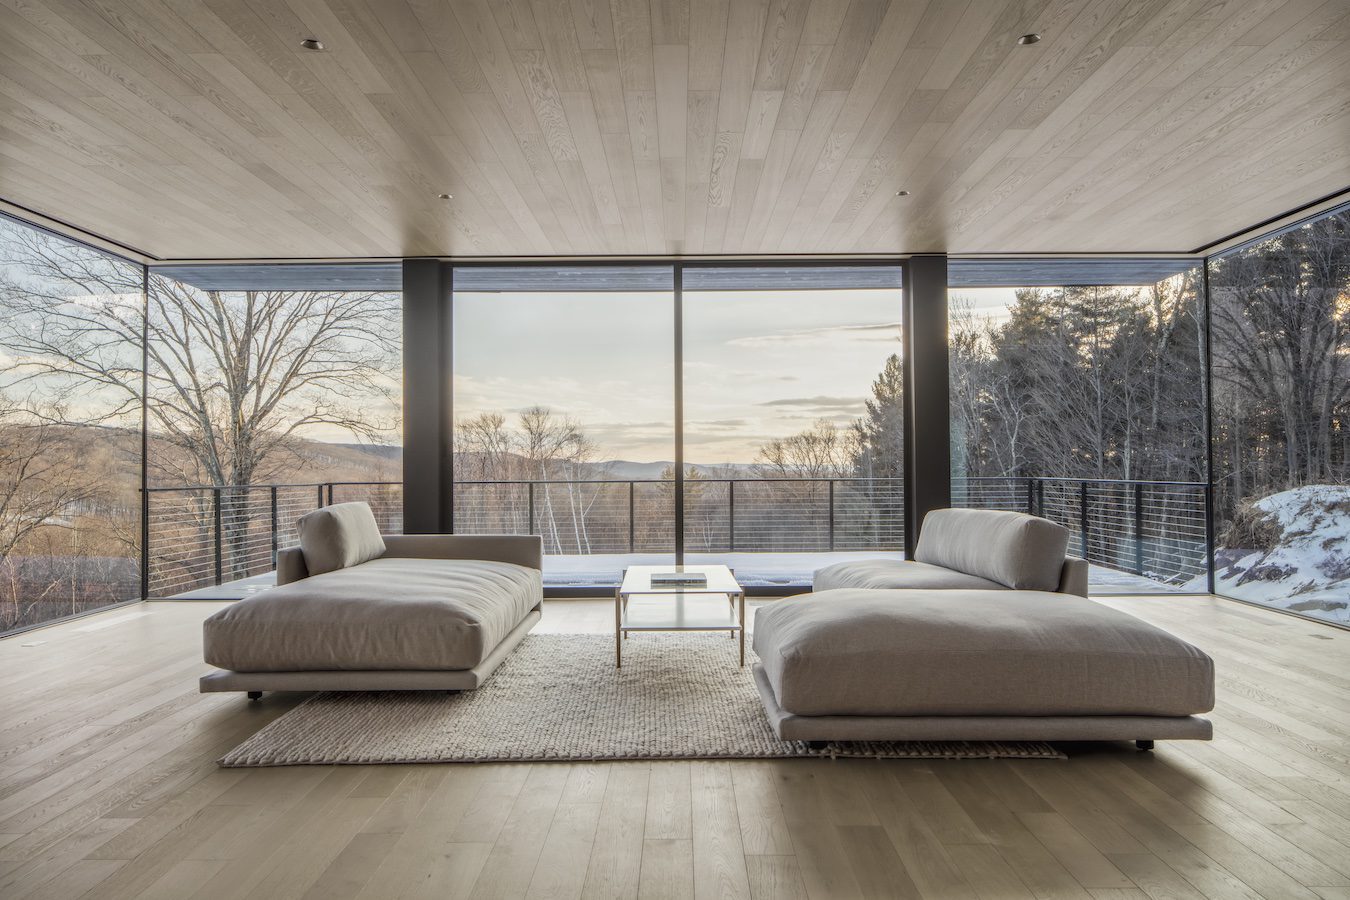 A residential living room with large windows offering breathtaking views of the mountains.